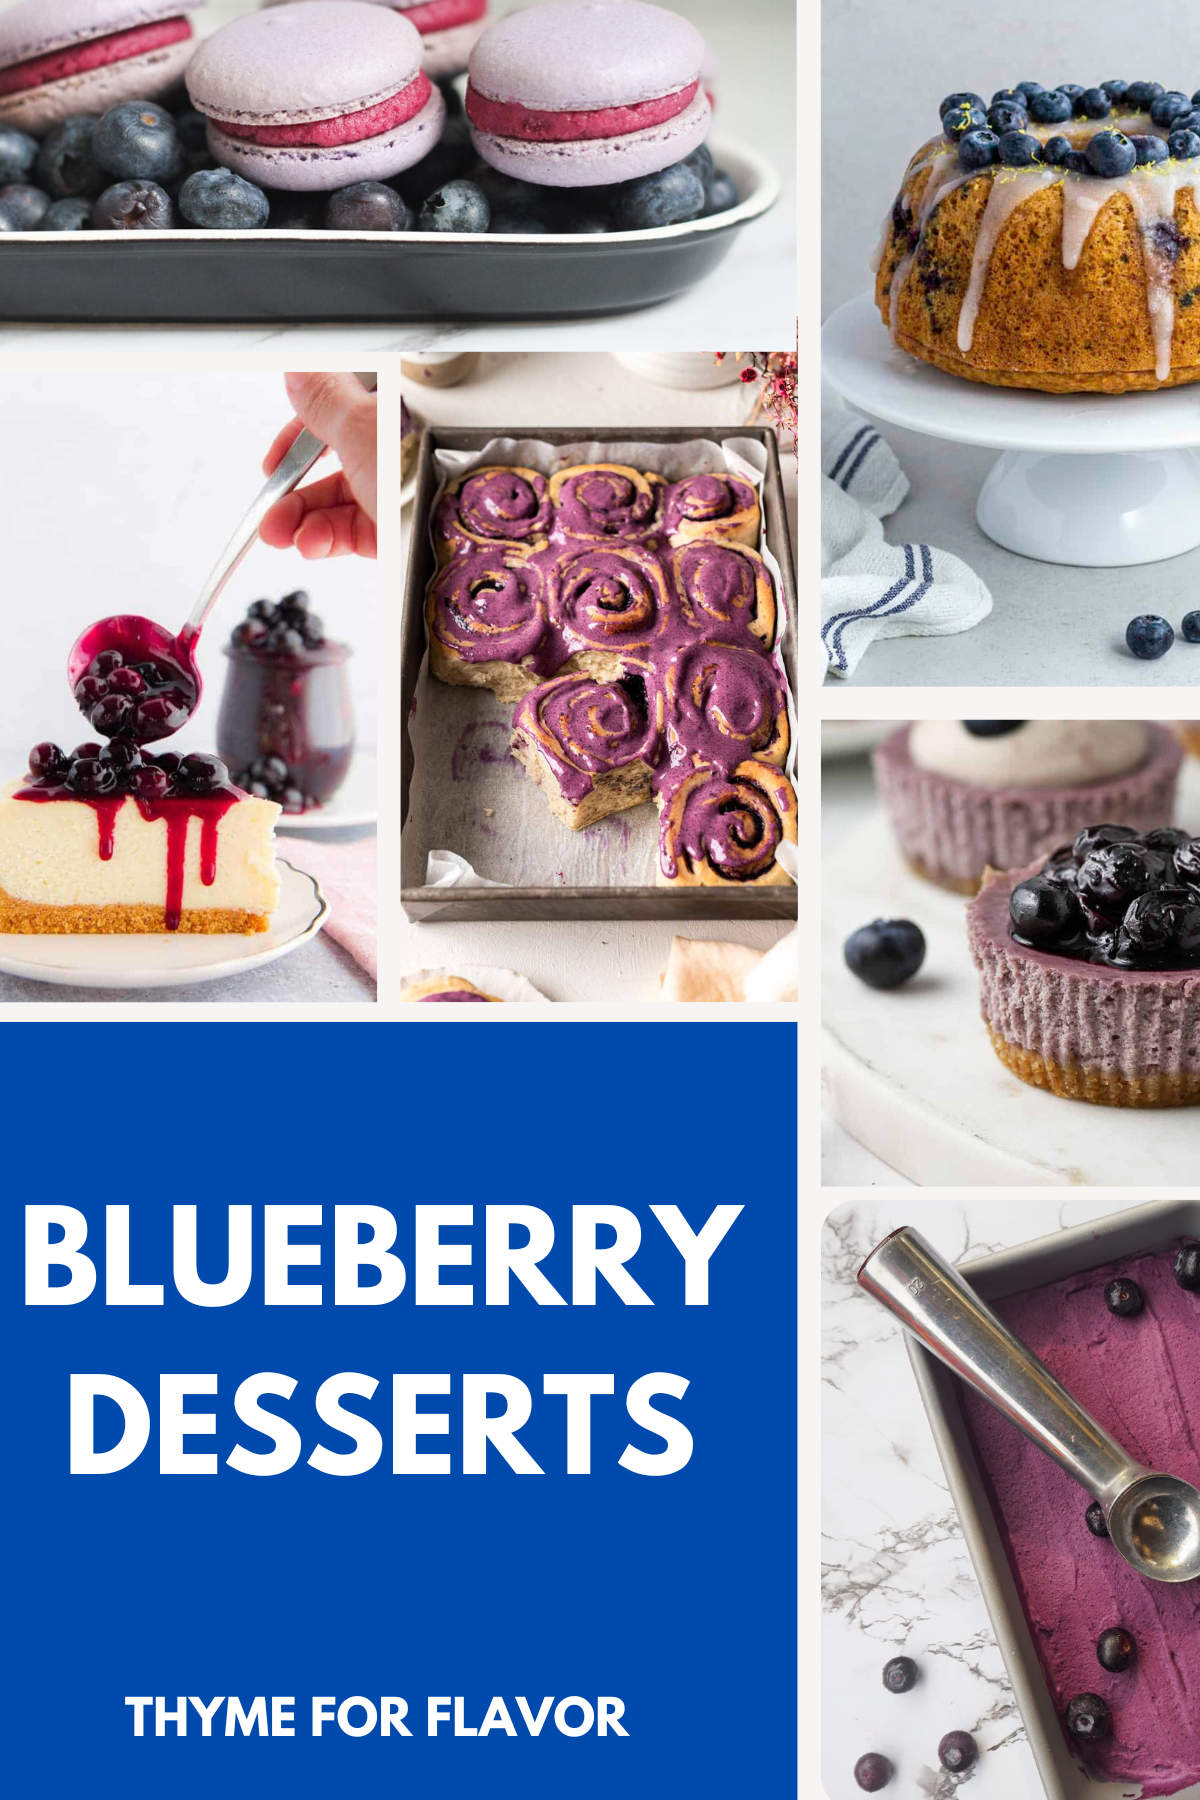 Images of blueberry desserts in a collage.